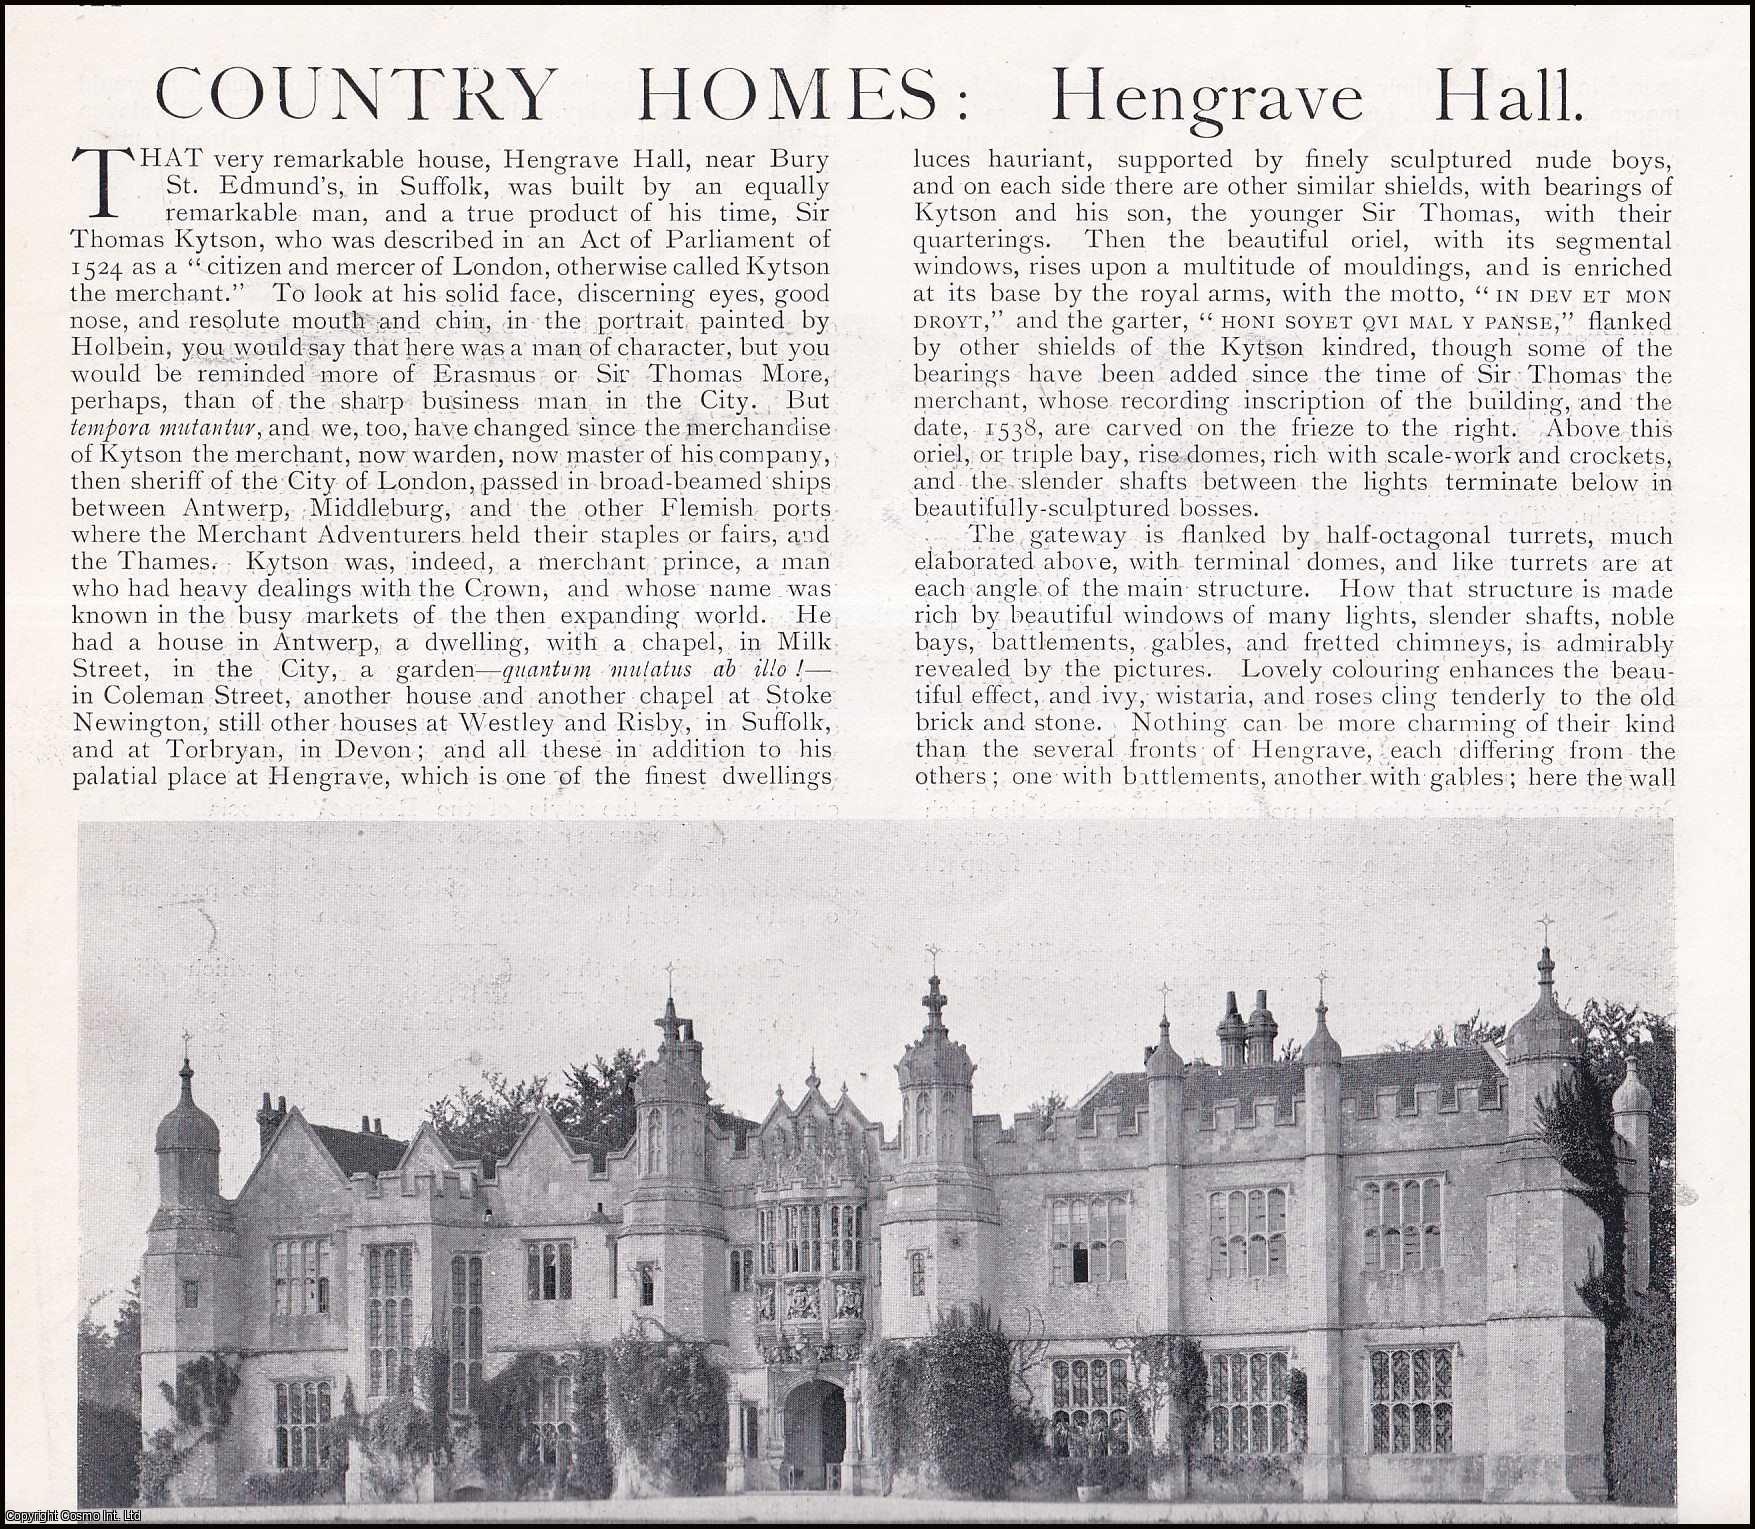 John Leyland - Hengrave Hall, Bury St. Edmunds, Suffolk. Several pictures and accompanying text, removed from an original issue of Country Life Magazine, 1897.